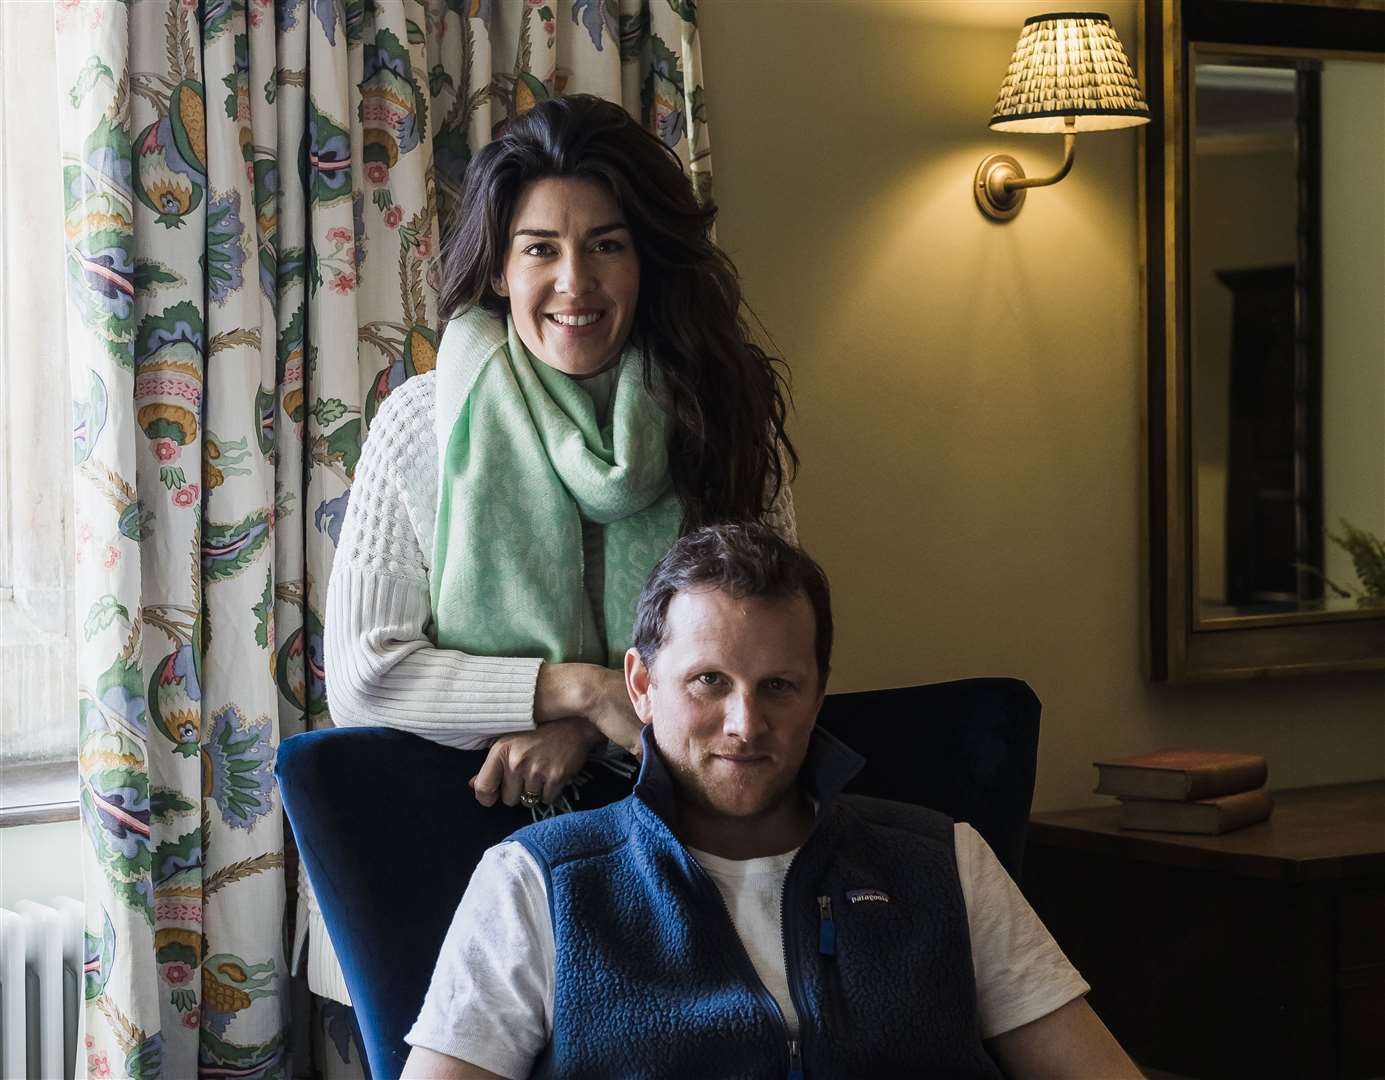 Kristie and Brad Lomas, owners of Boys Hall in Willesborough. Picture: Sideways Media